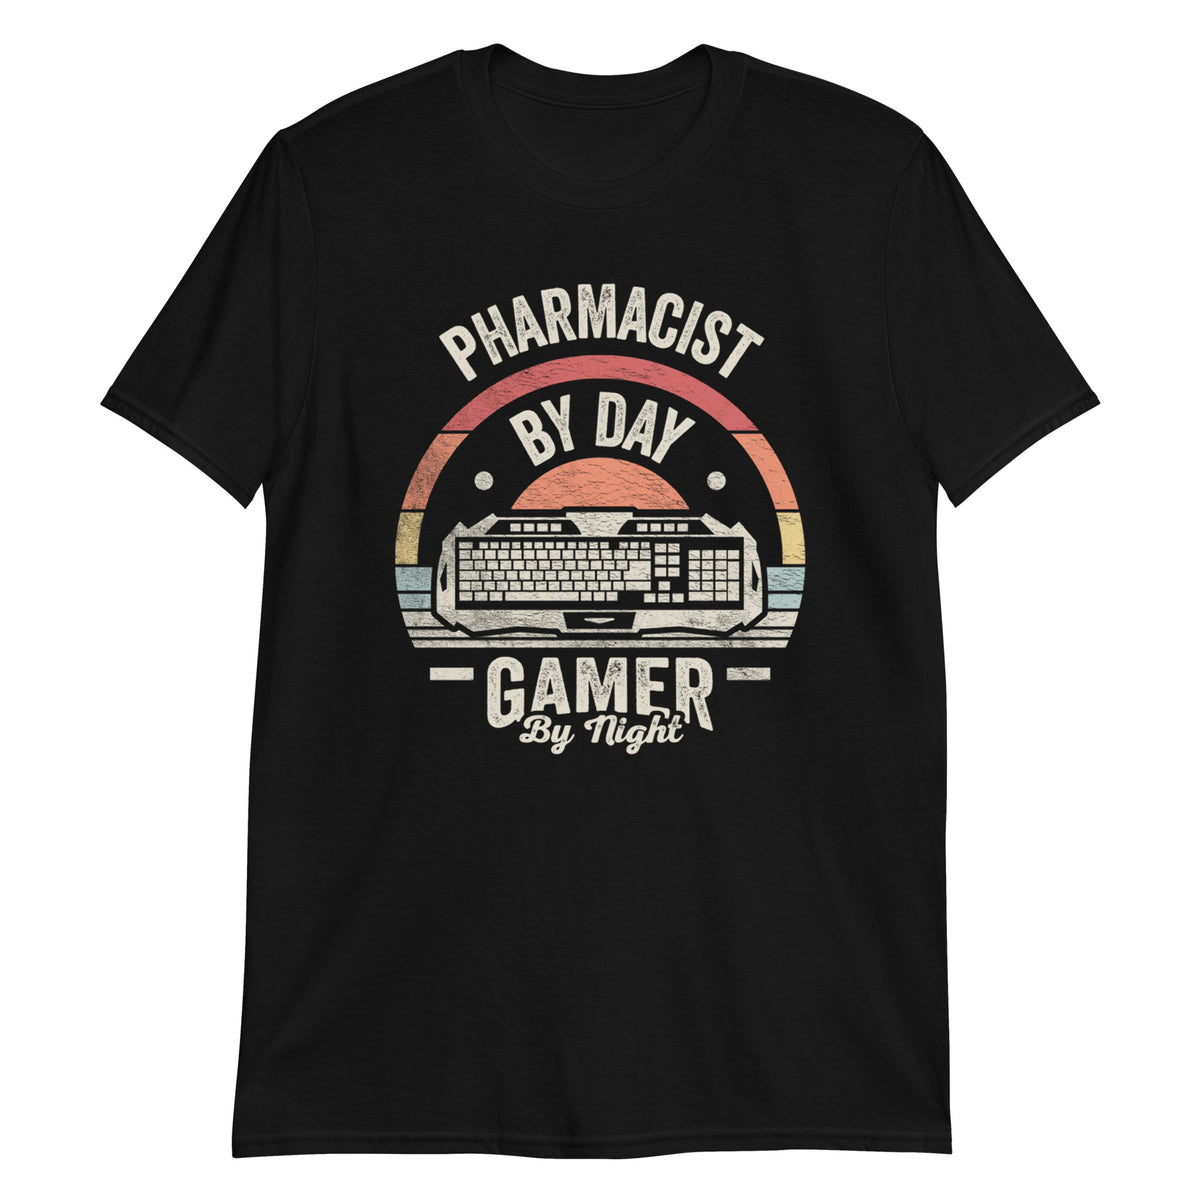 Pharmacist By Day Gamer By Night T-Shirt